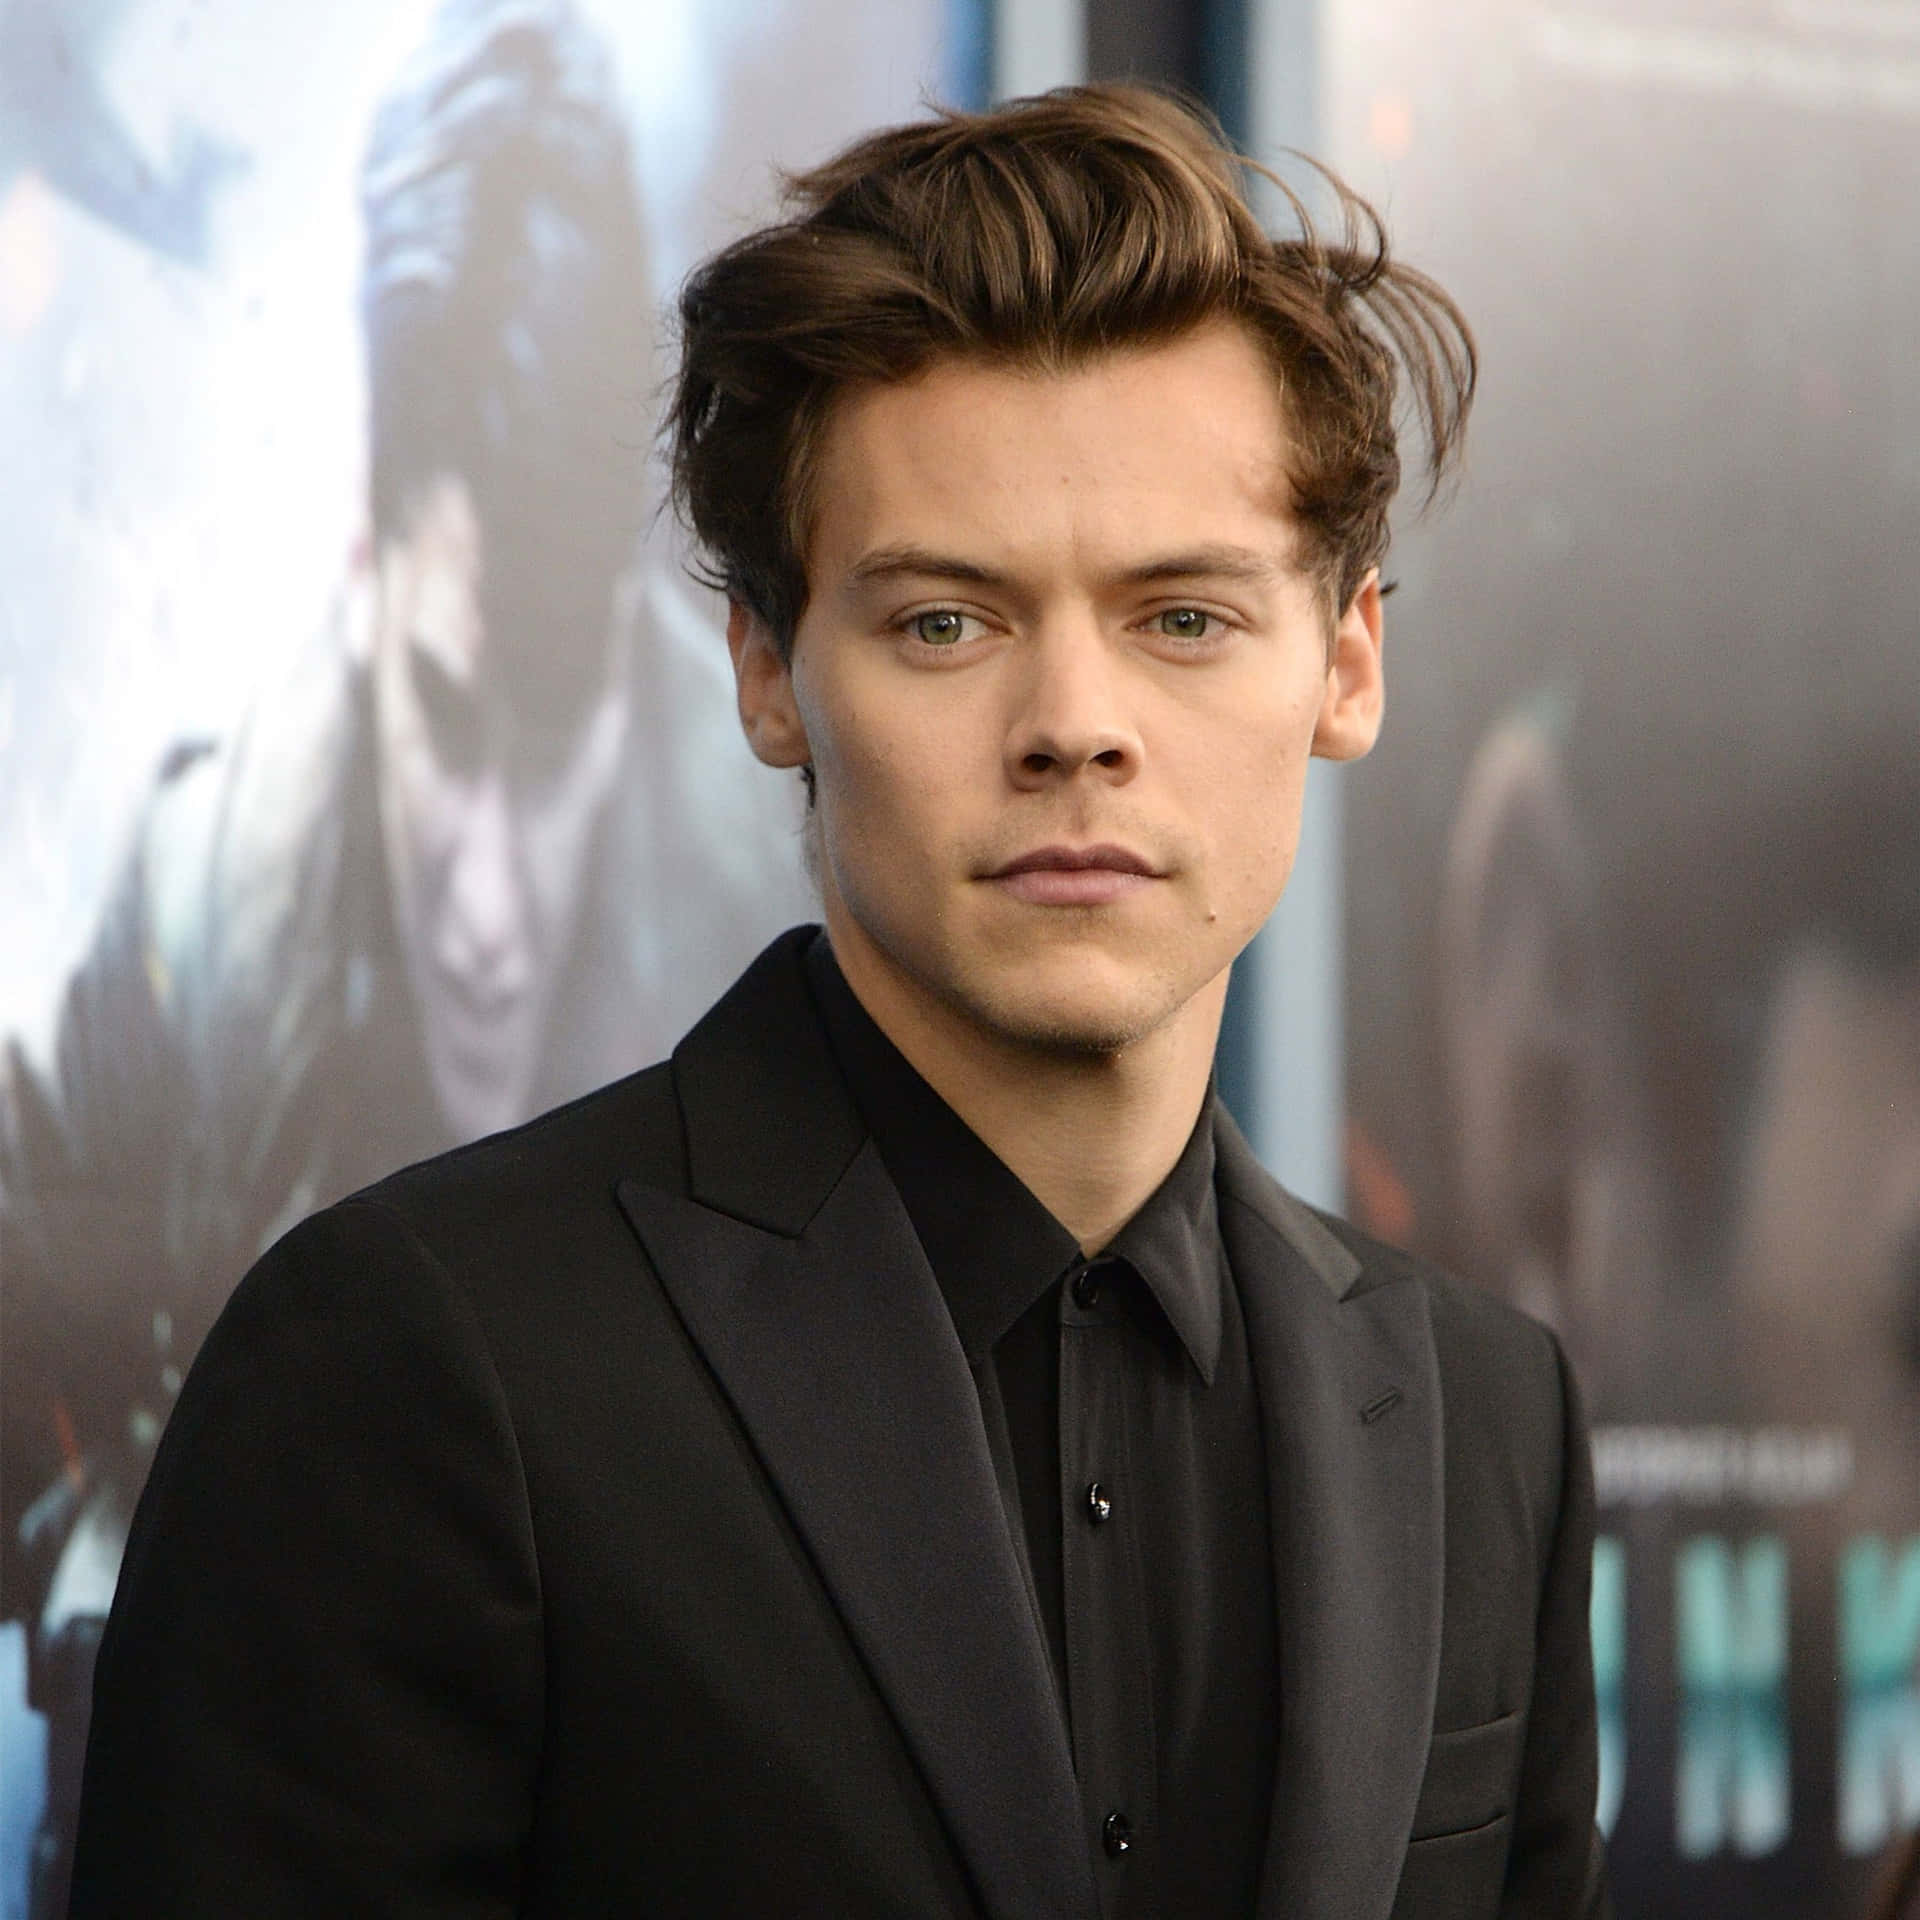 Singer Harry Styles Looking Dashing In A Chic Outfit